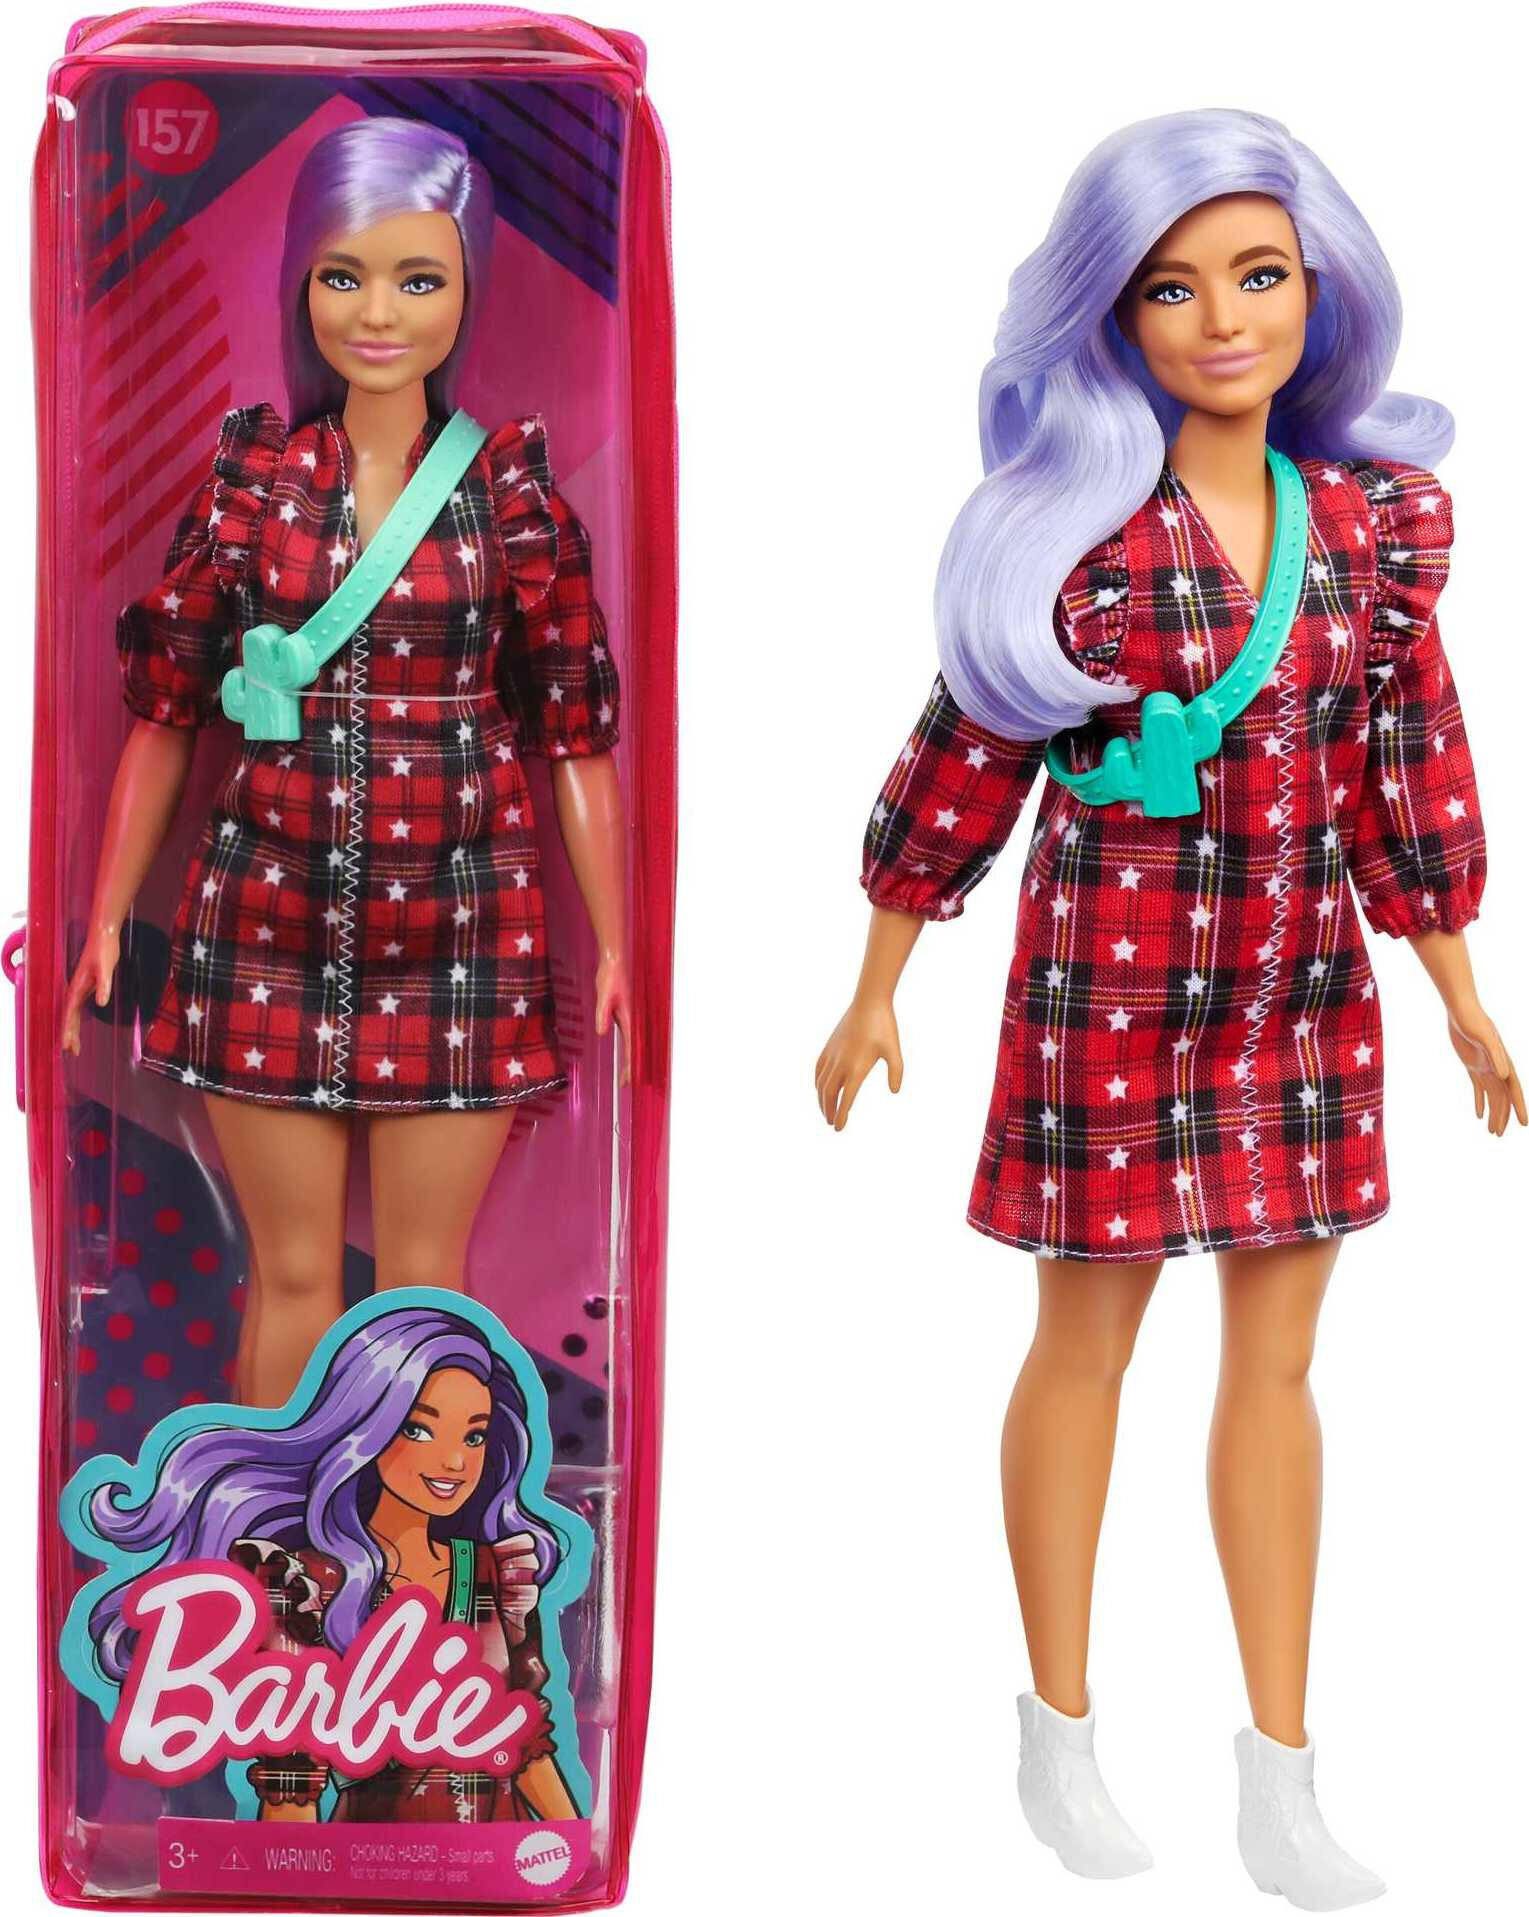 Barbie Fashionistas Doll #157, Curvy with Lavender Hair in Red Plaid Dress & White Cowboy Boots - image 1 of 7